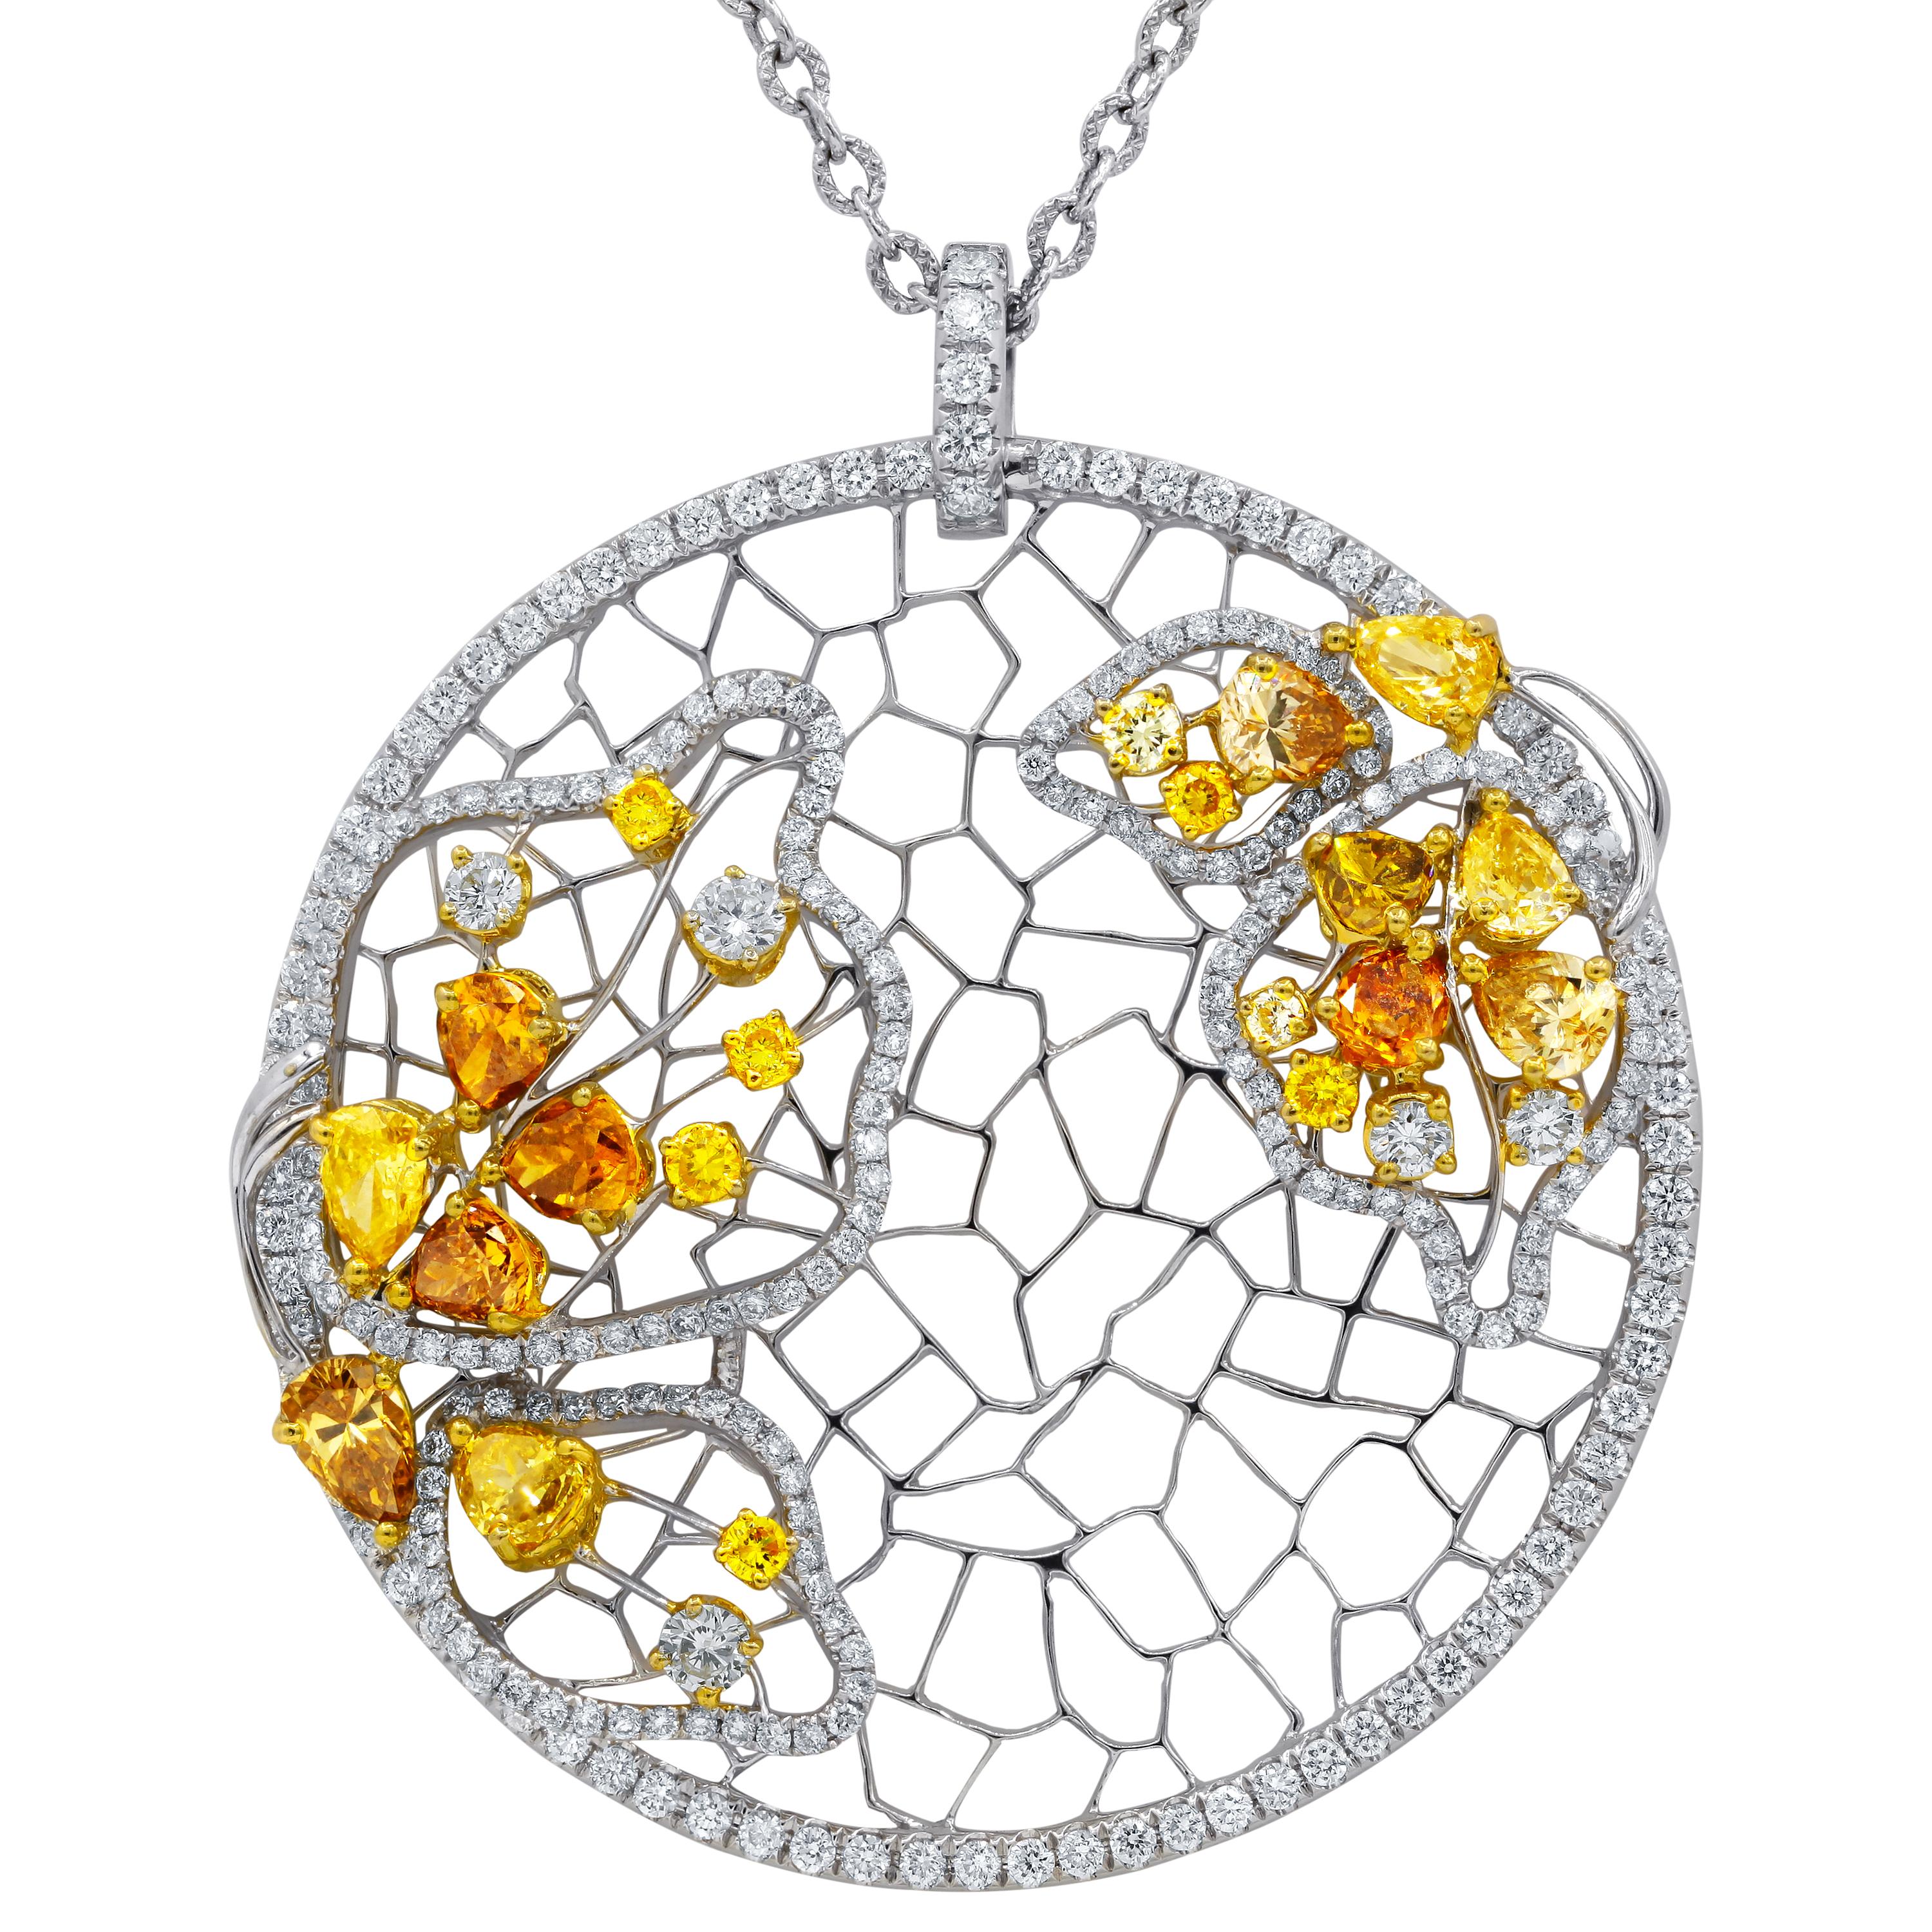 18kt white gold diamond pendant necklace features 5.59 carats of diamonds including fancy yellow and white.
